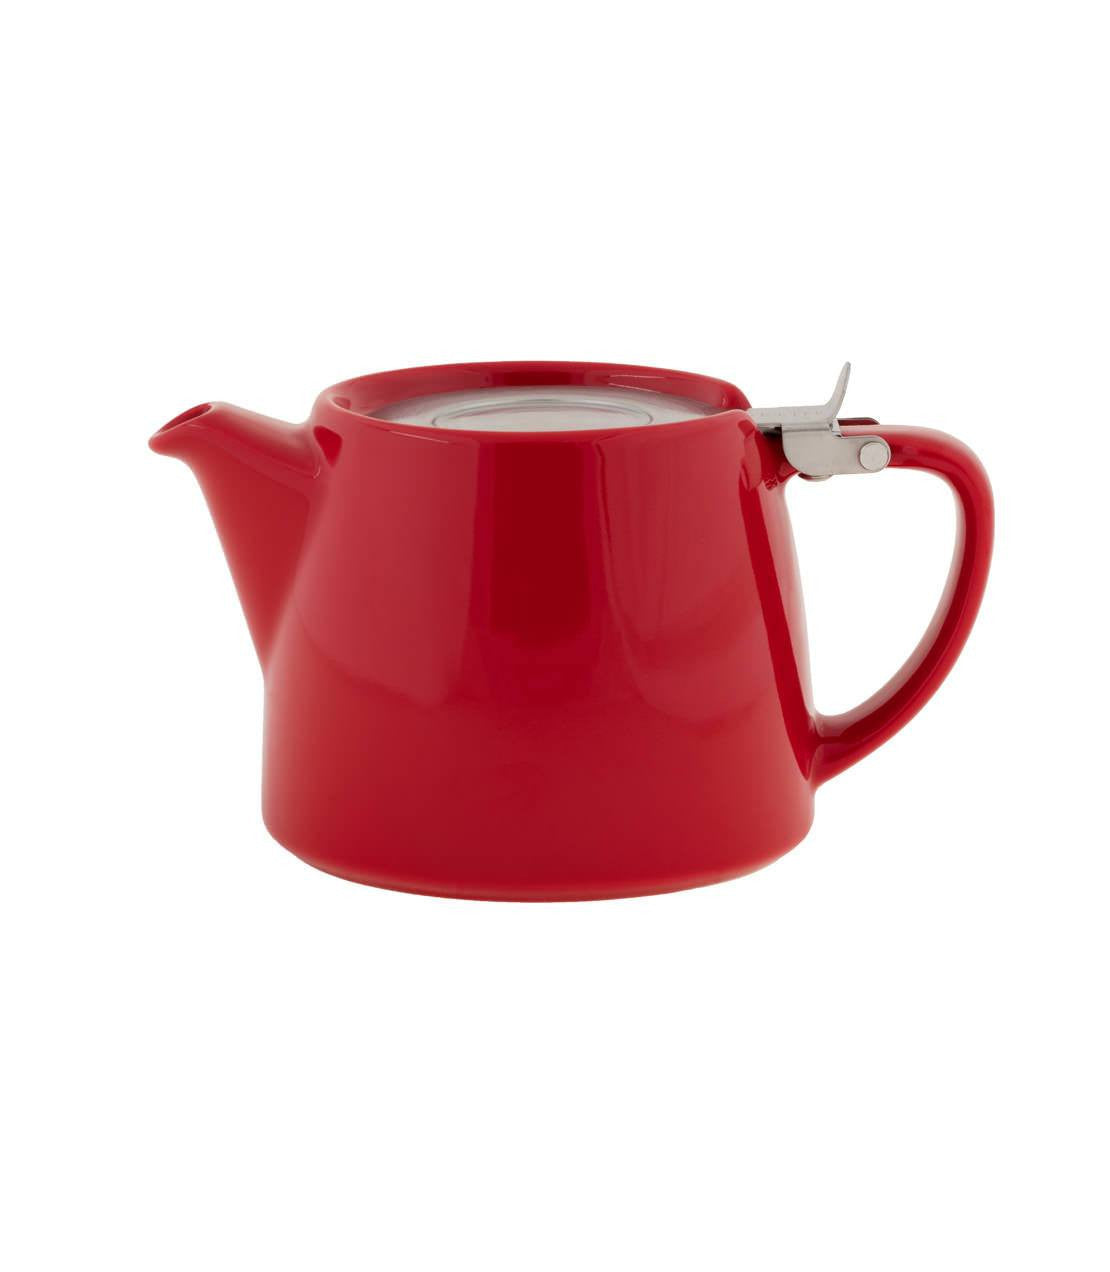 Stump Teapot with Infuser 18 oz (Multiple colors) - 18 oz. Red - Harney & Sons Fine Teas